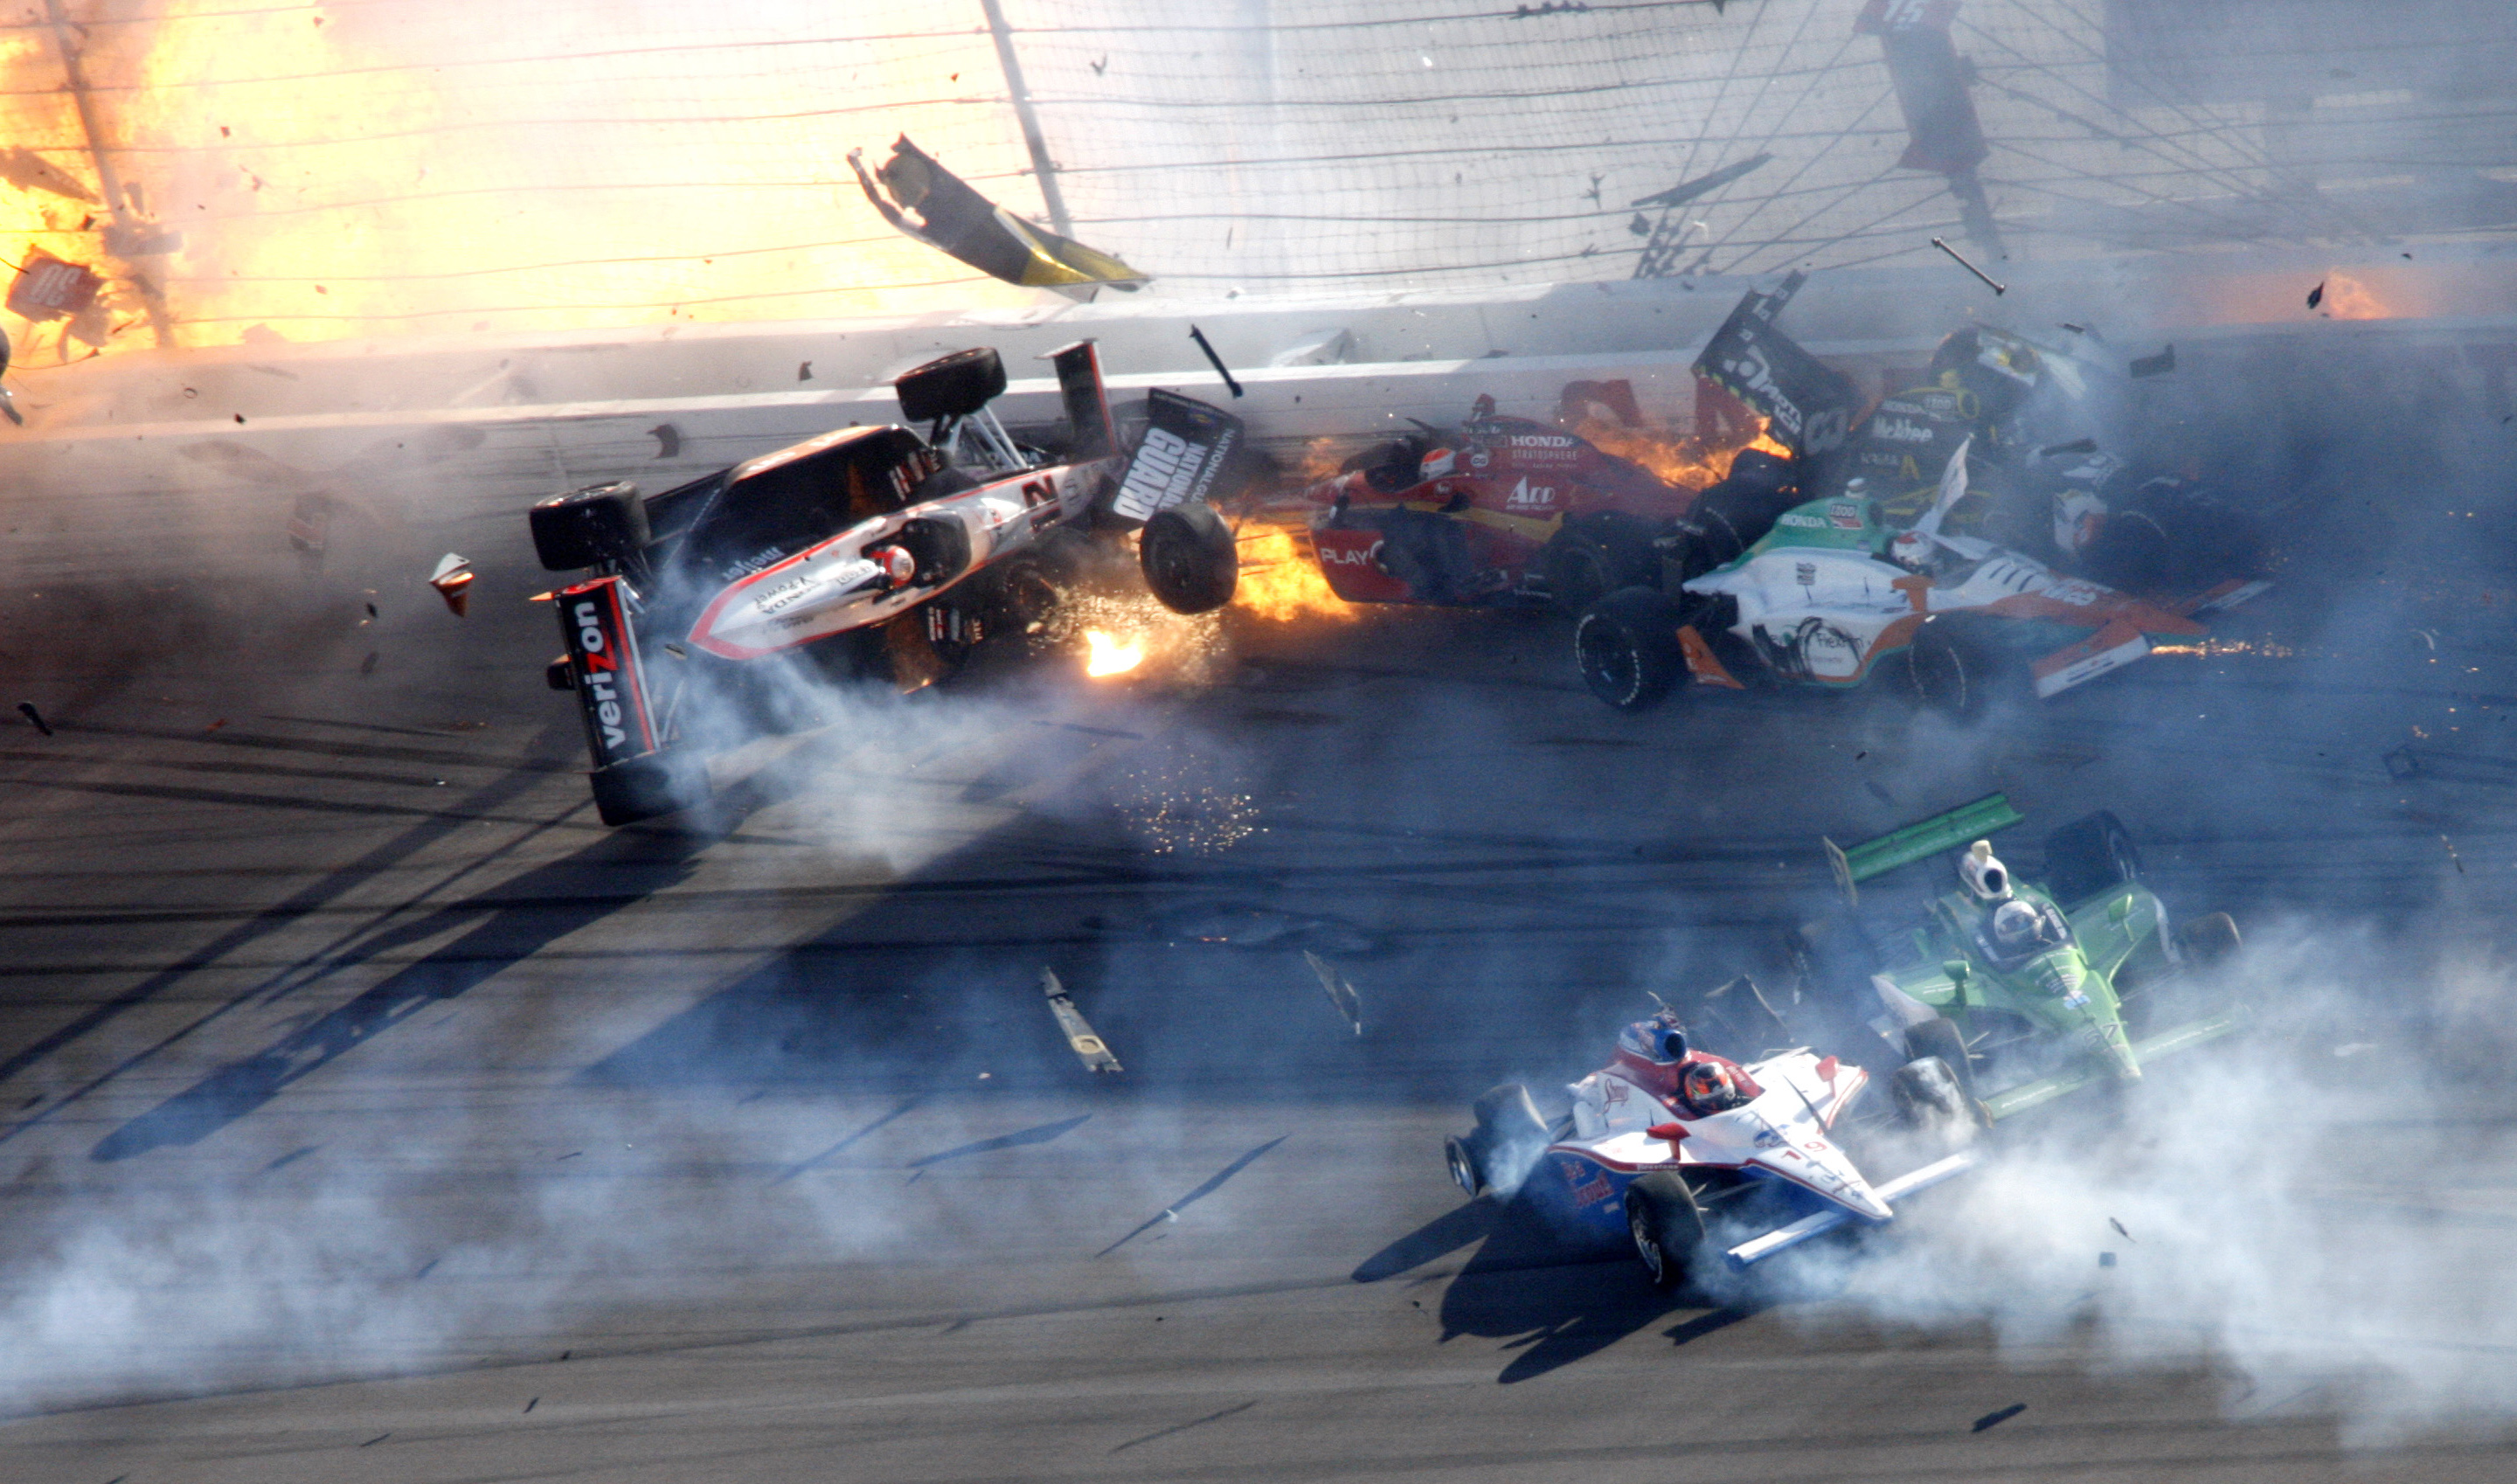 VIDEO Wheldon, 33, 2-time winner at Indy, killed